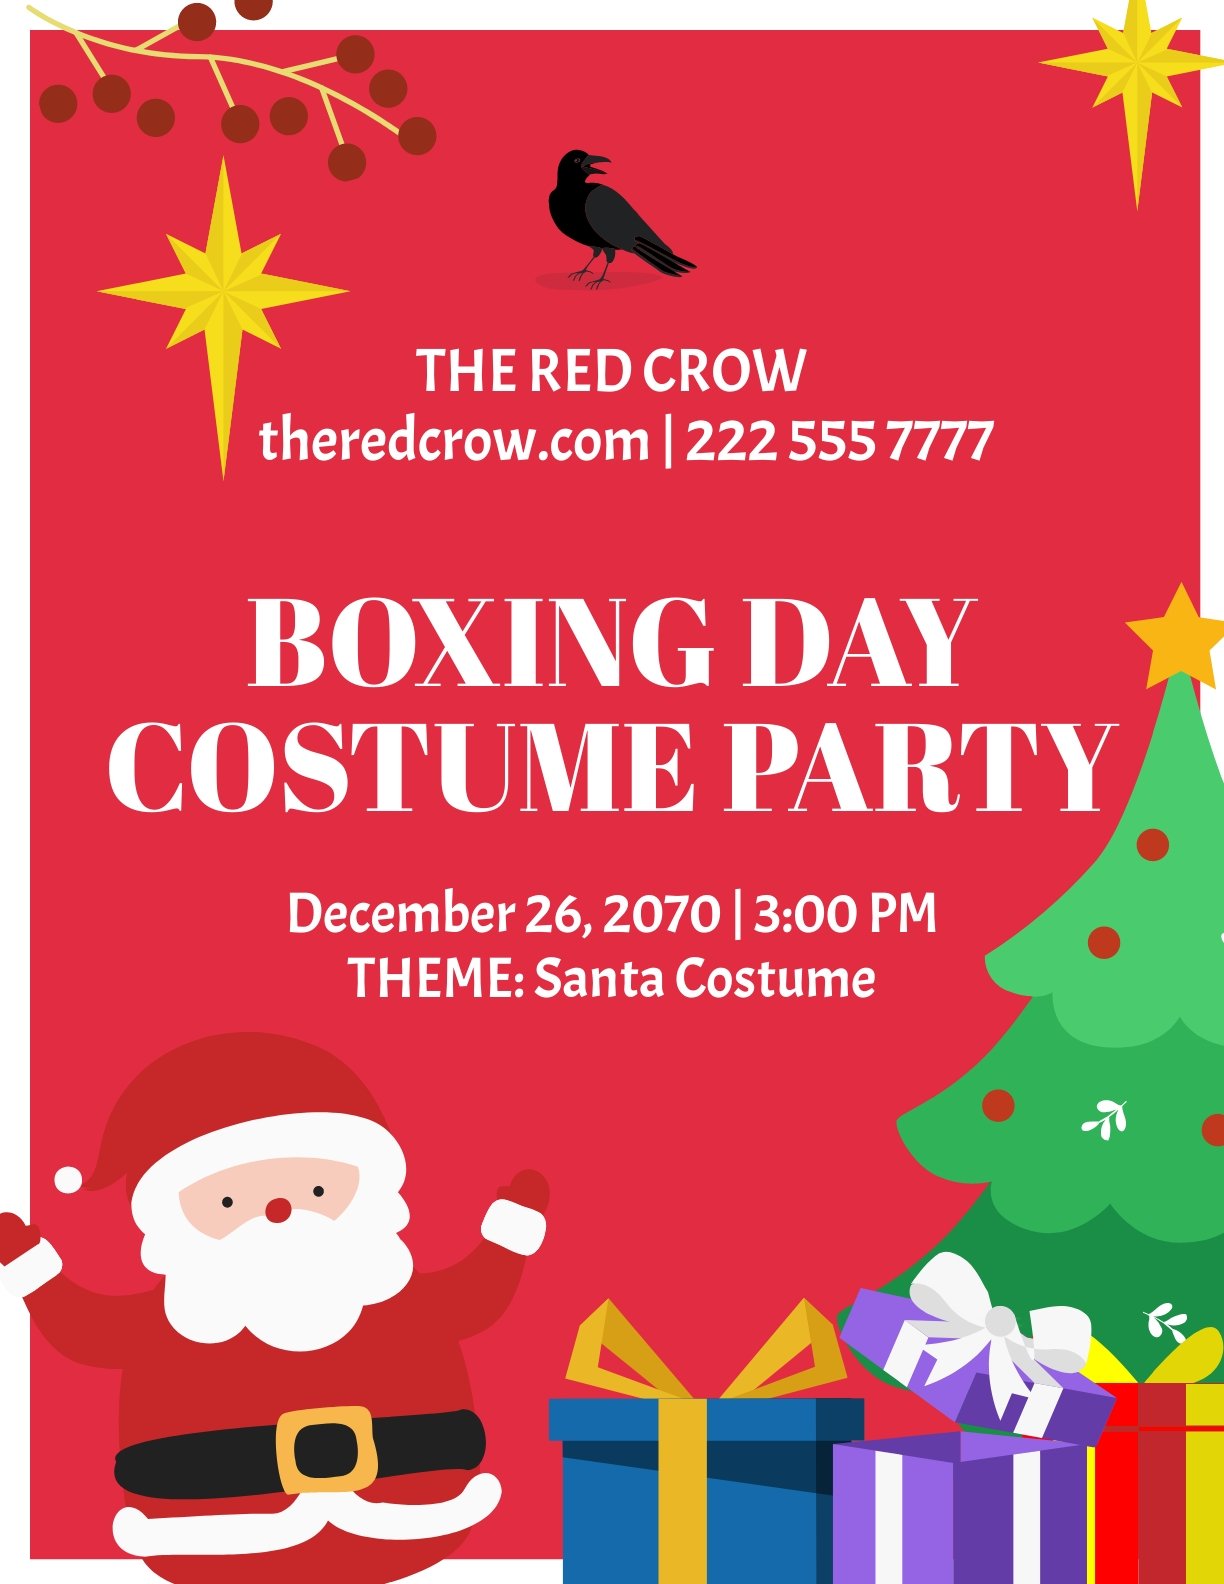 Free Creative Boxing Day Flyer in Word, Google Docs, Illustrator, PSD, EPS, SVG, JPG, PNG